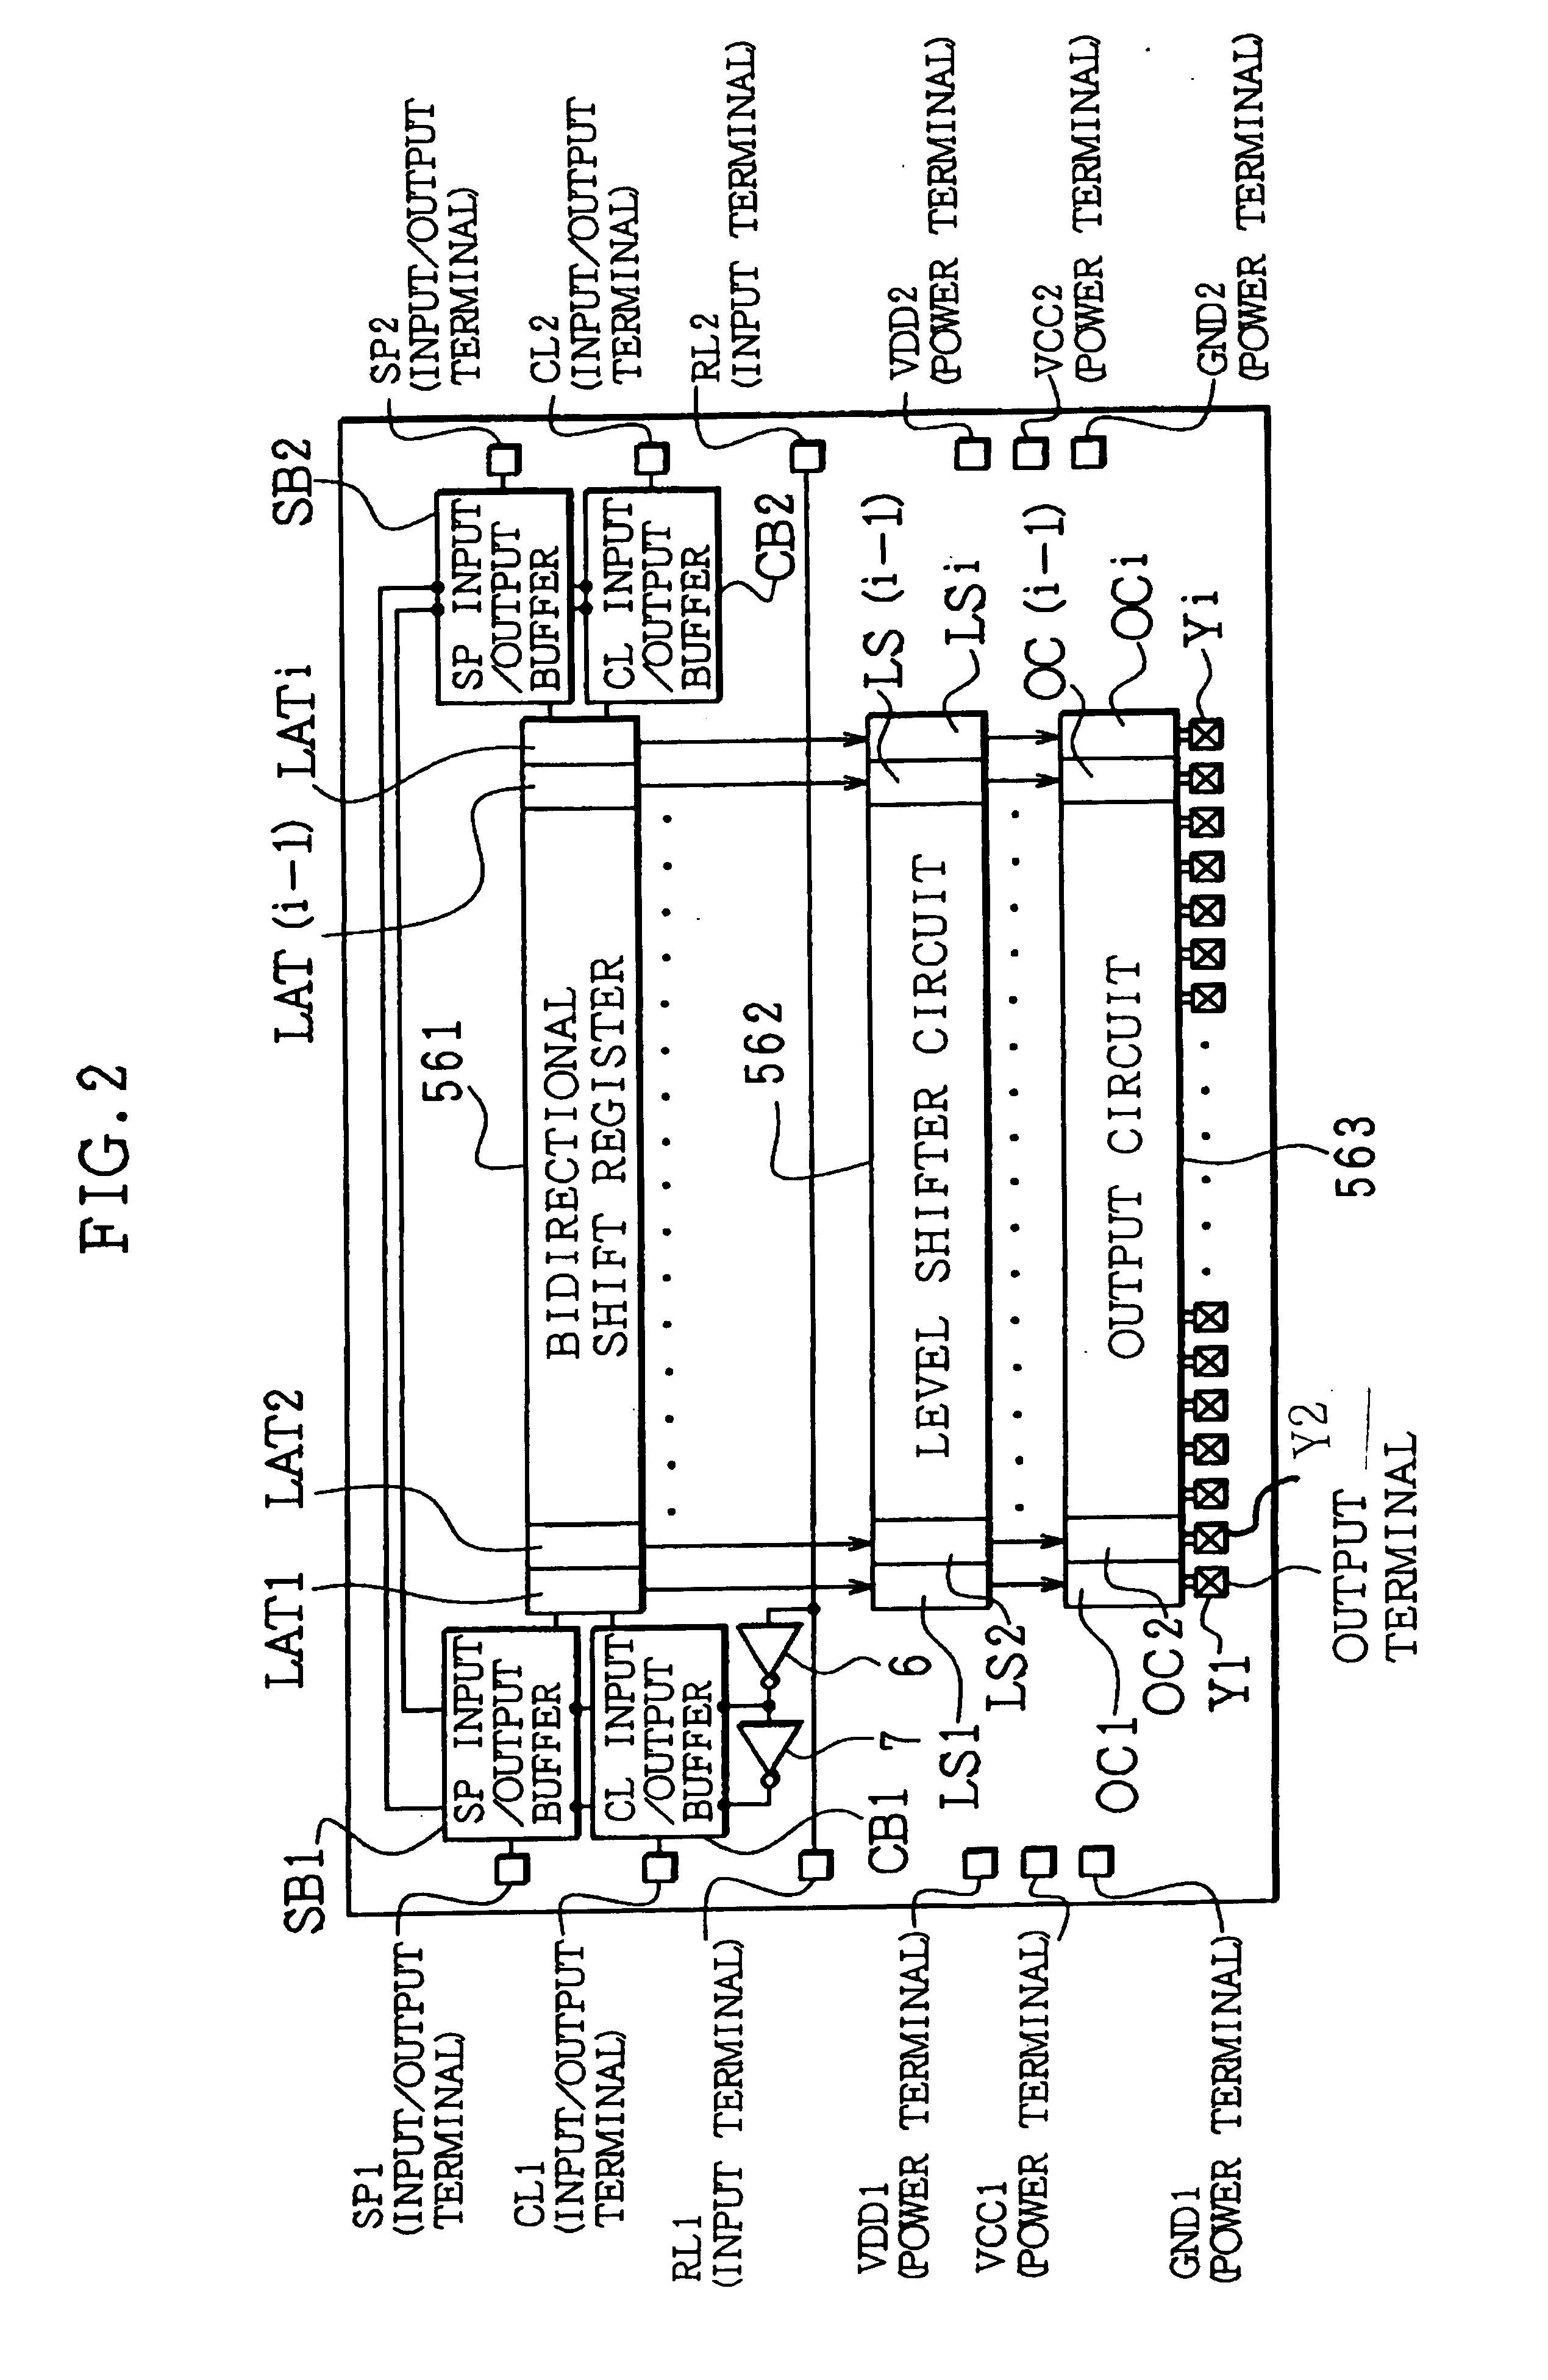 Display driving device and manufacturing method thereof and liquid crystal module employing the same